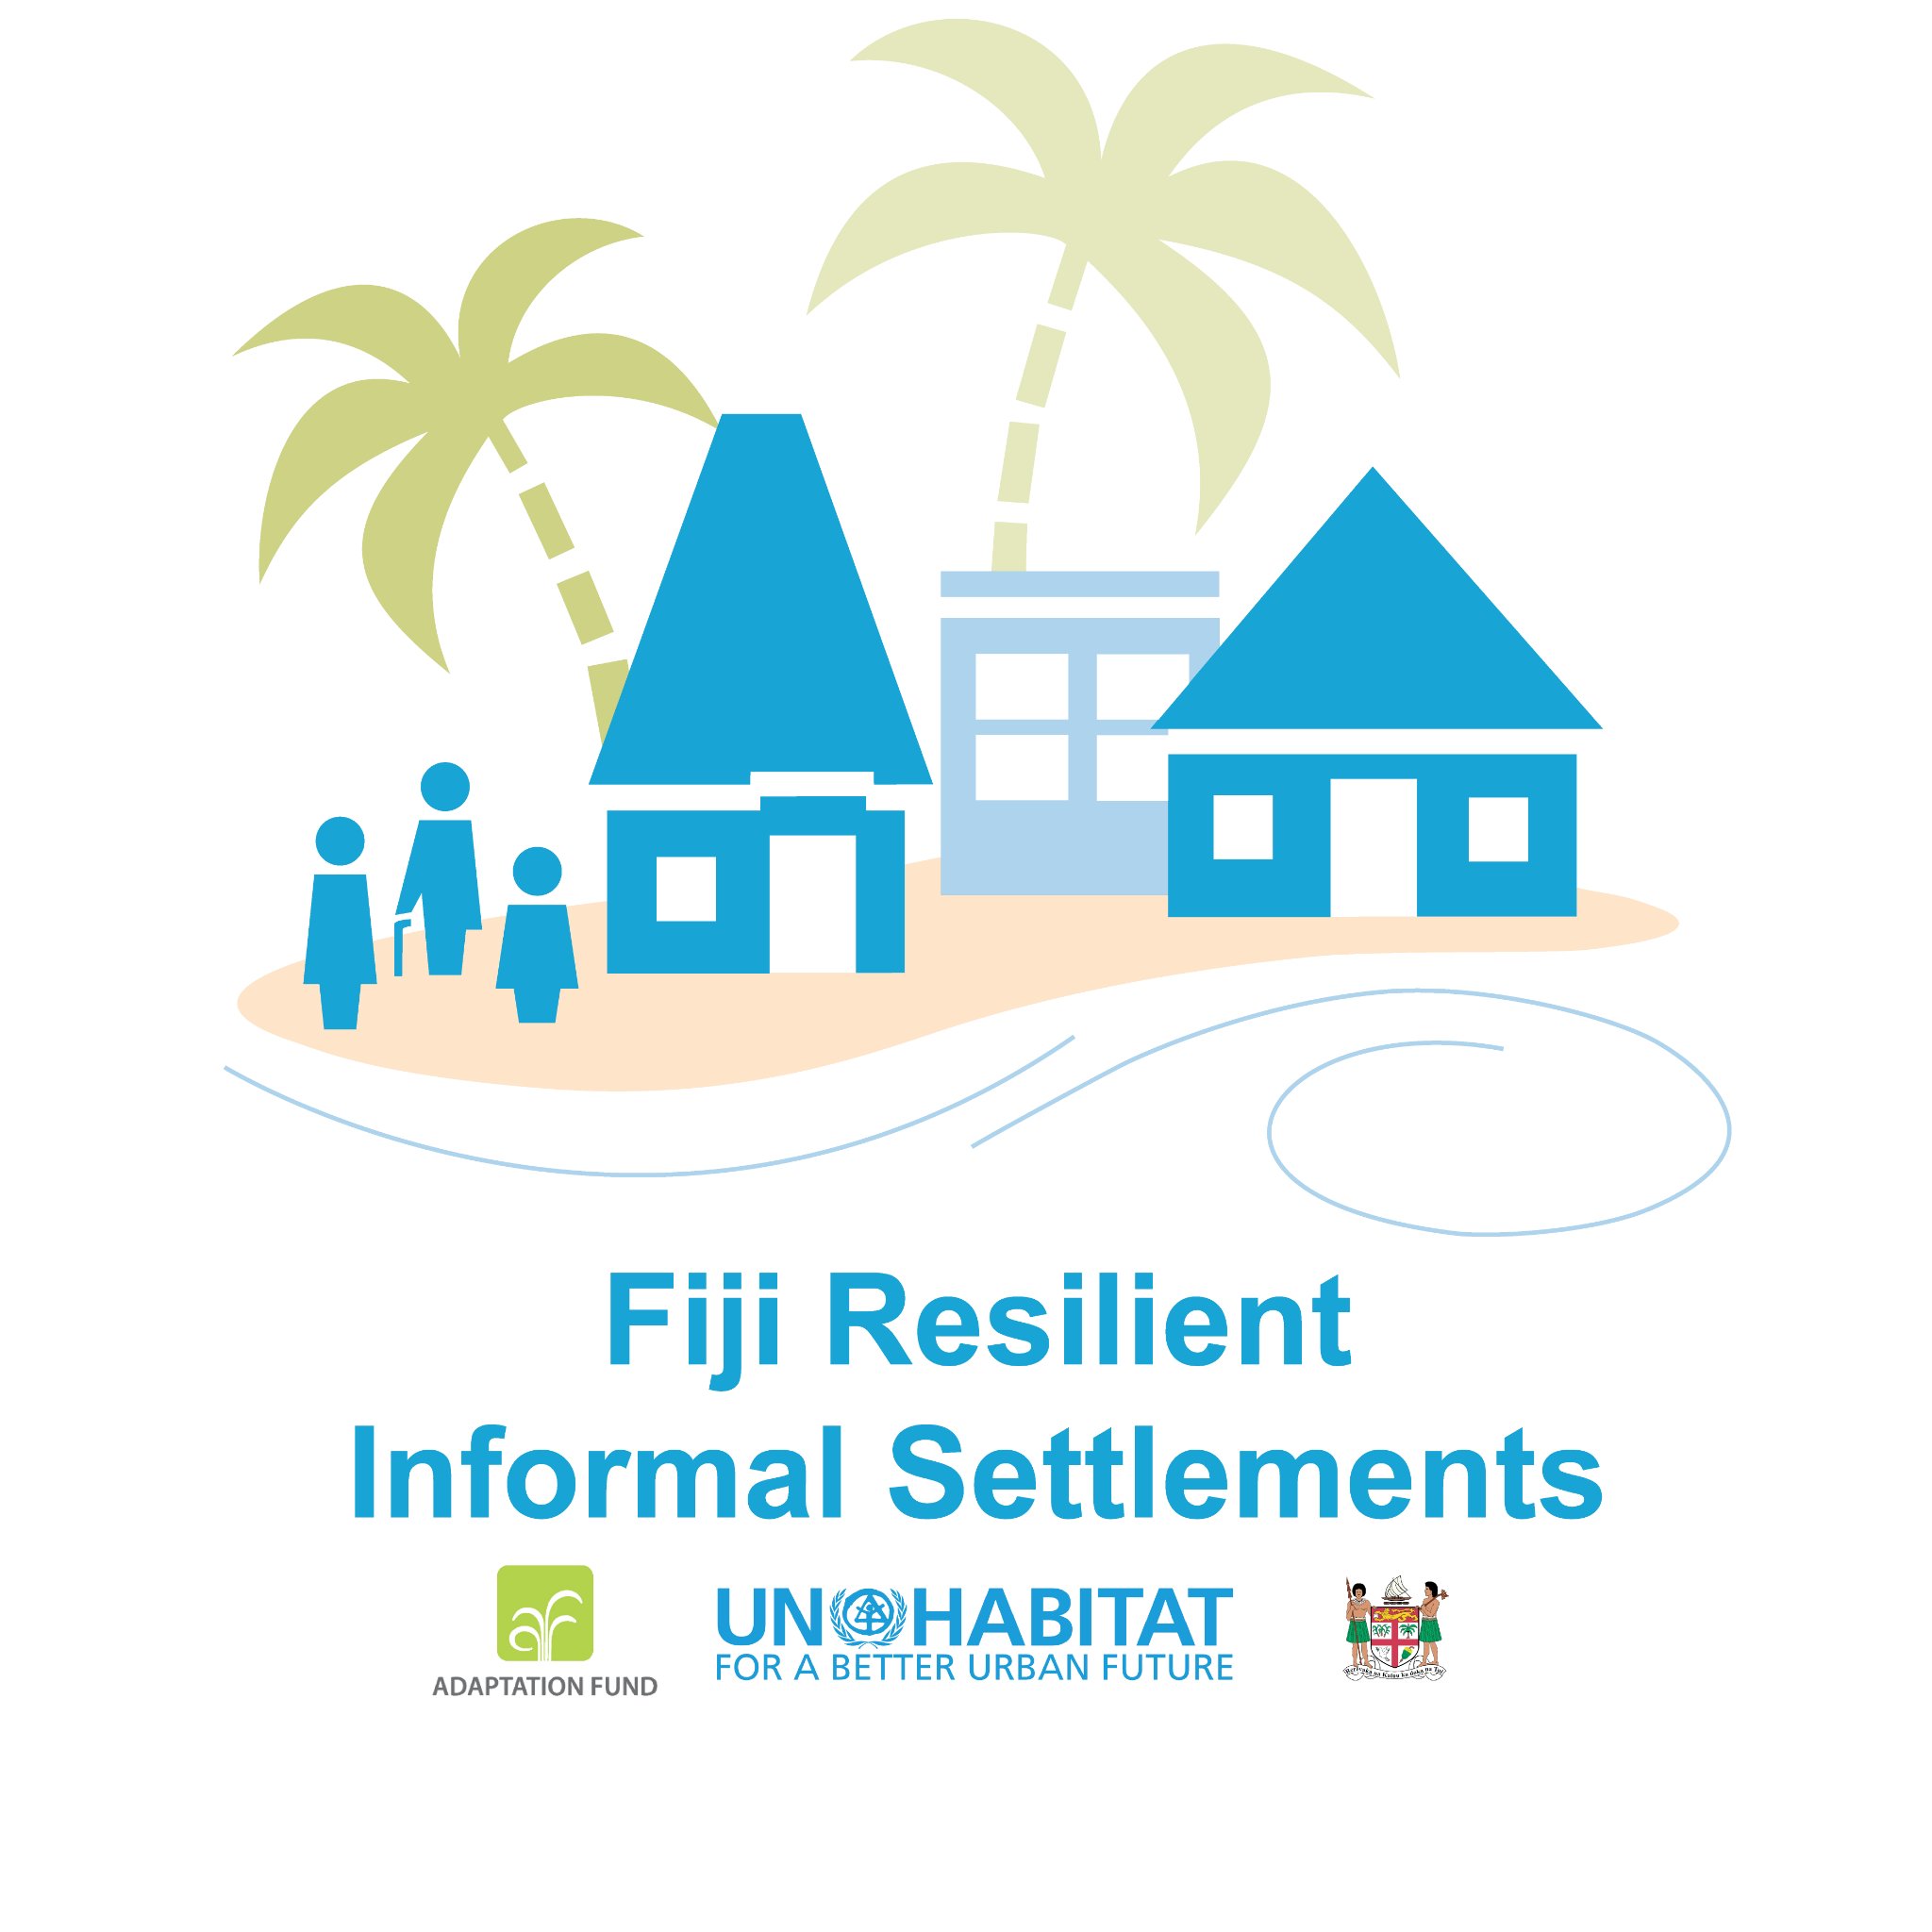 The Fiji Resilient Informal Settlements Project supports the most vulnerable communities in building adaptive capacity against climate change and disaster risks